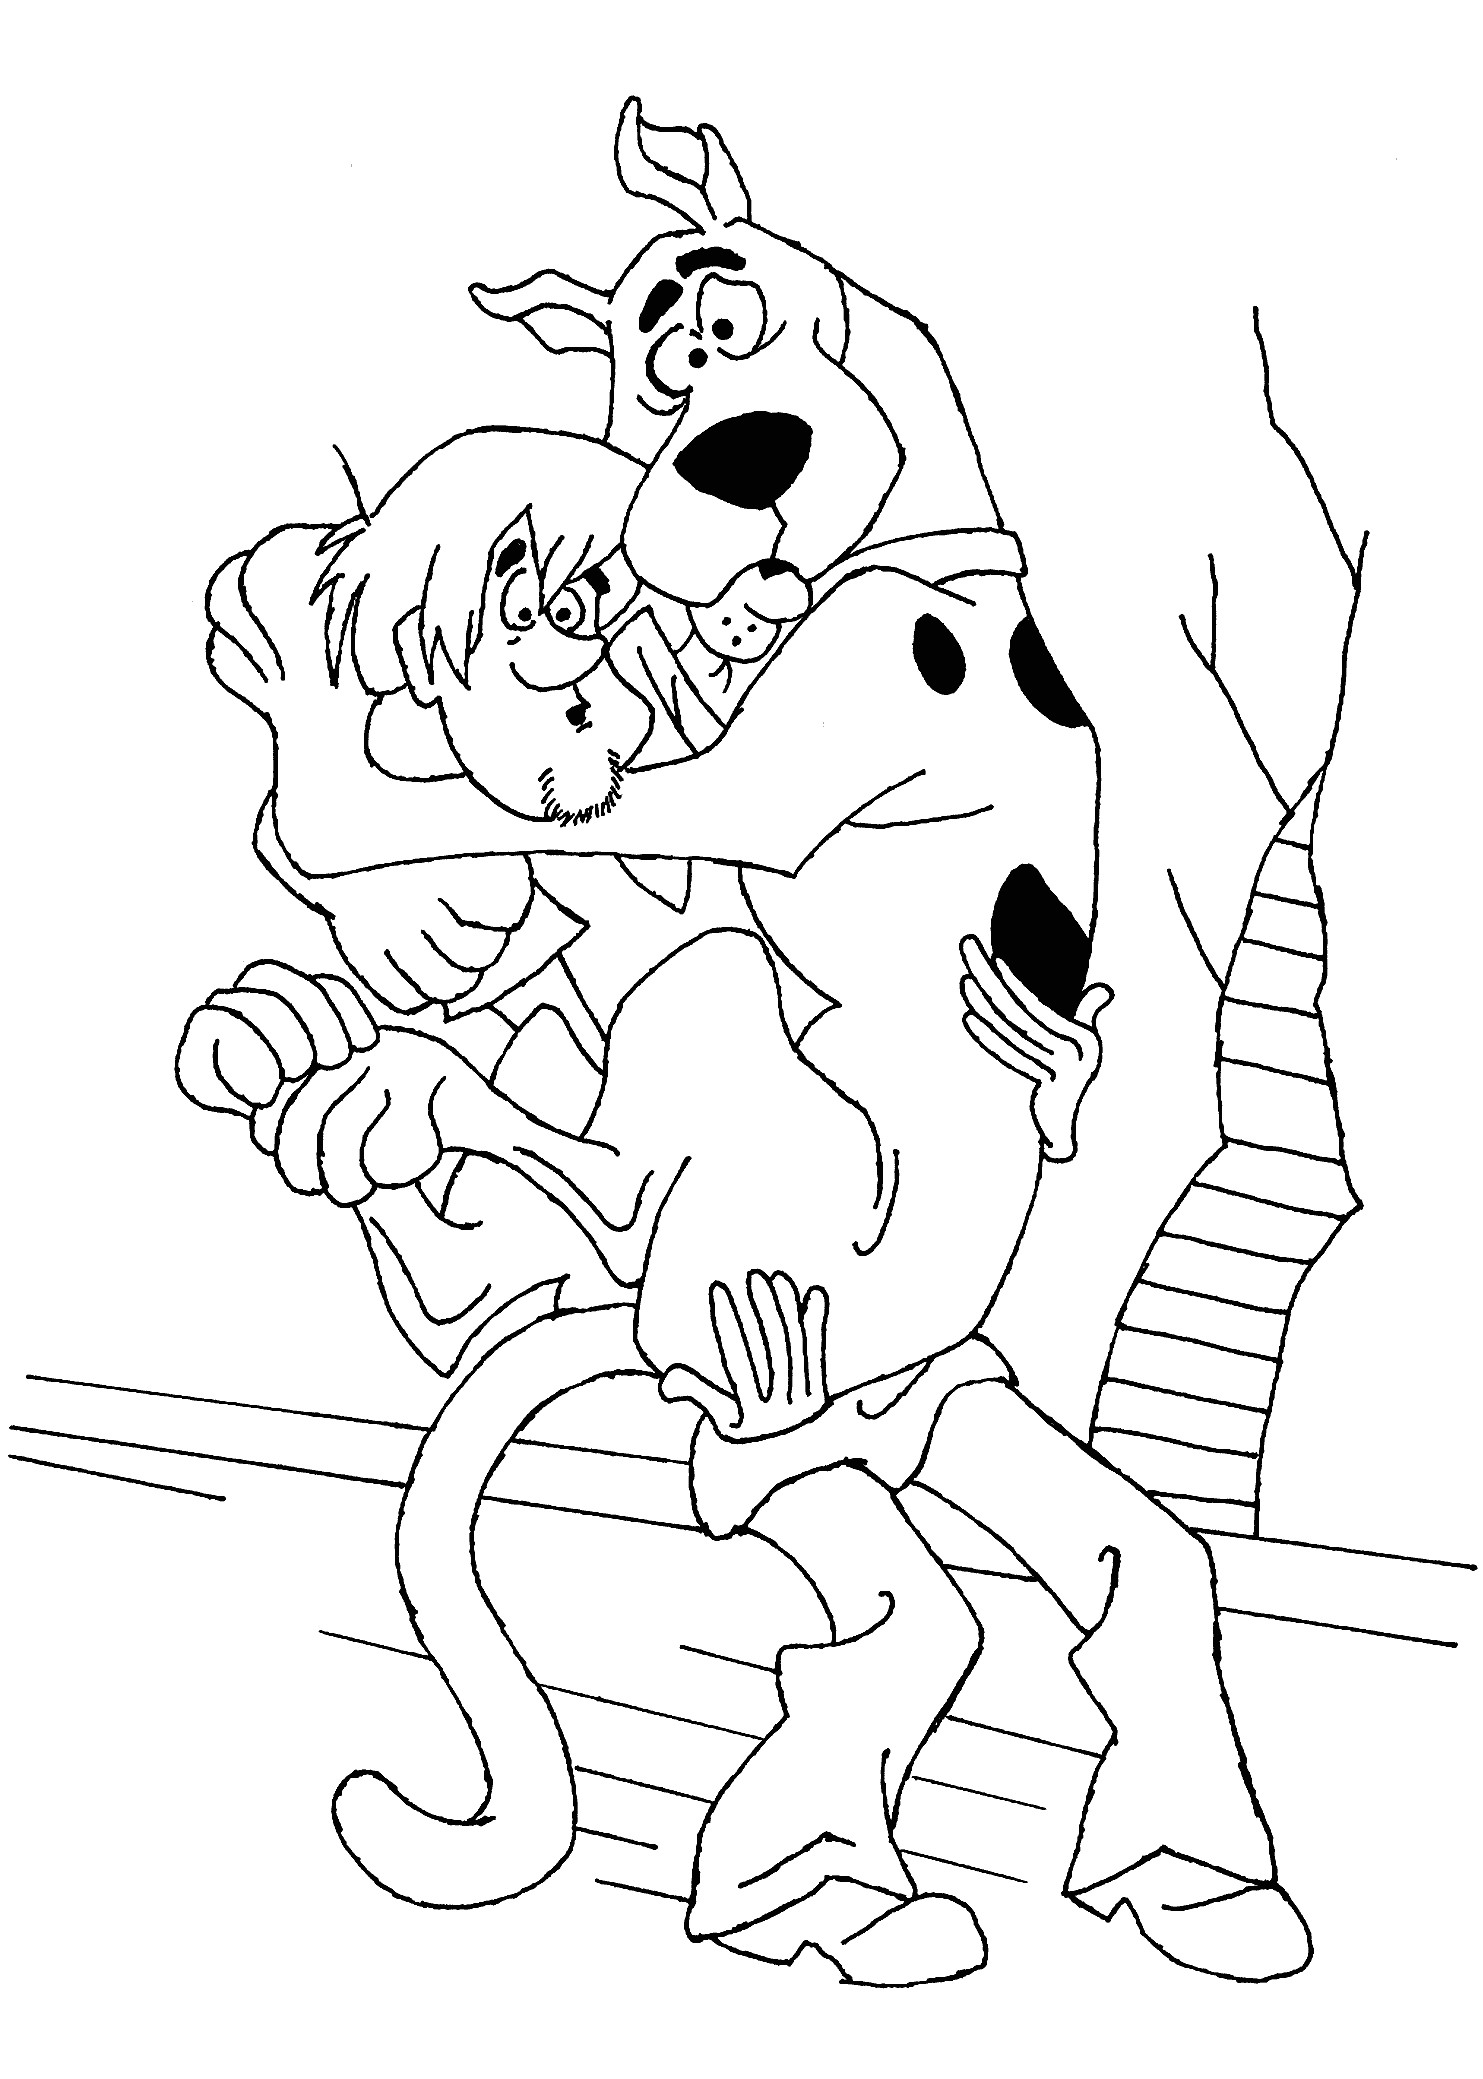 Funny Scooby Doo coloring pages for kids printable free